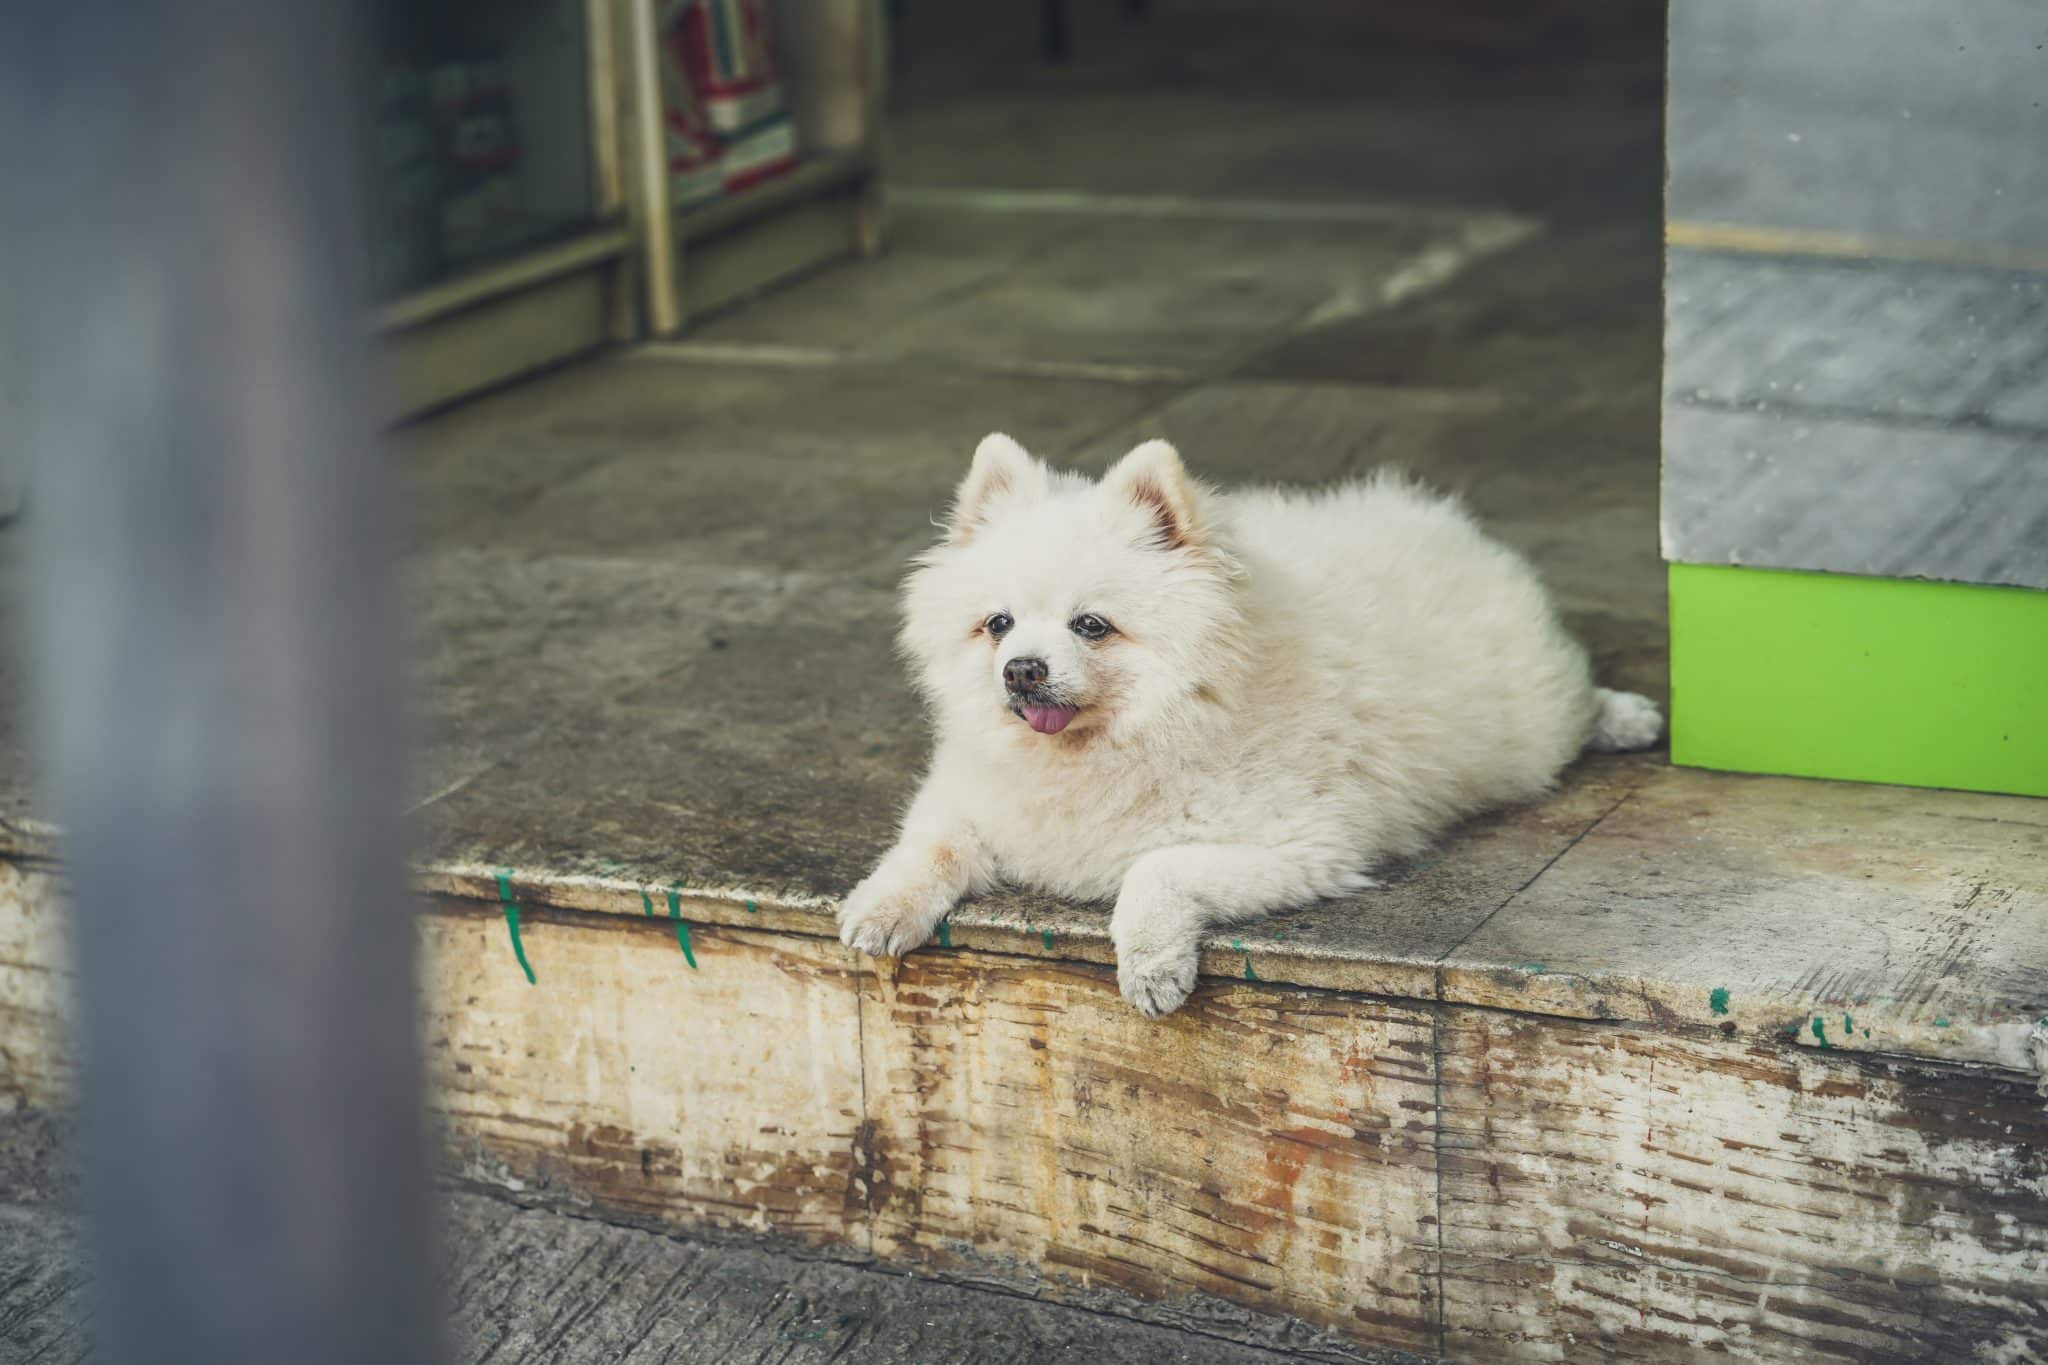 A fluffy white dog sits on a porch with its tongue out